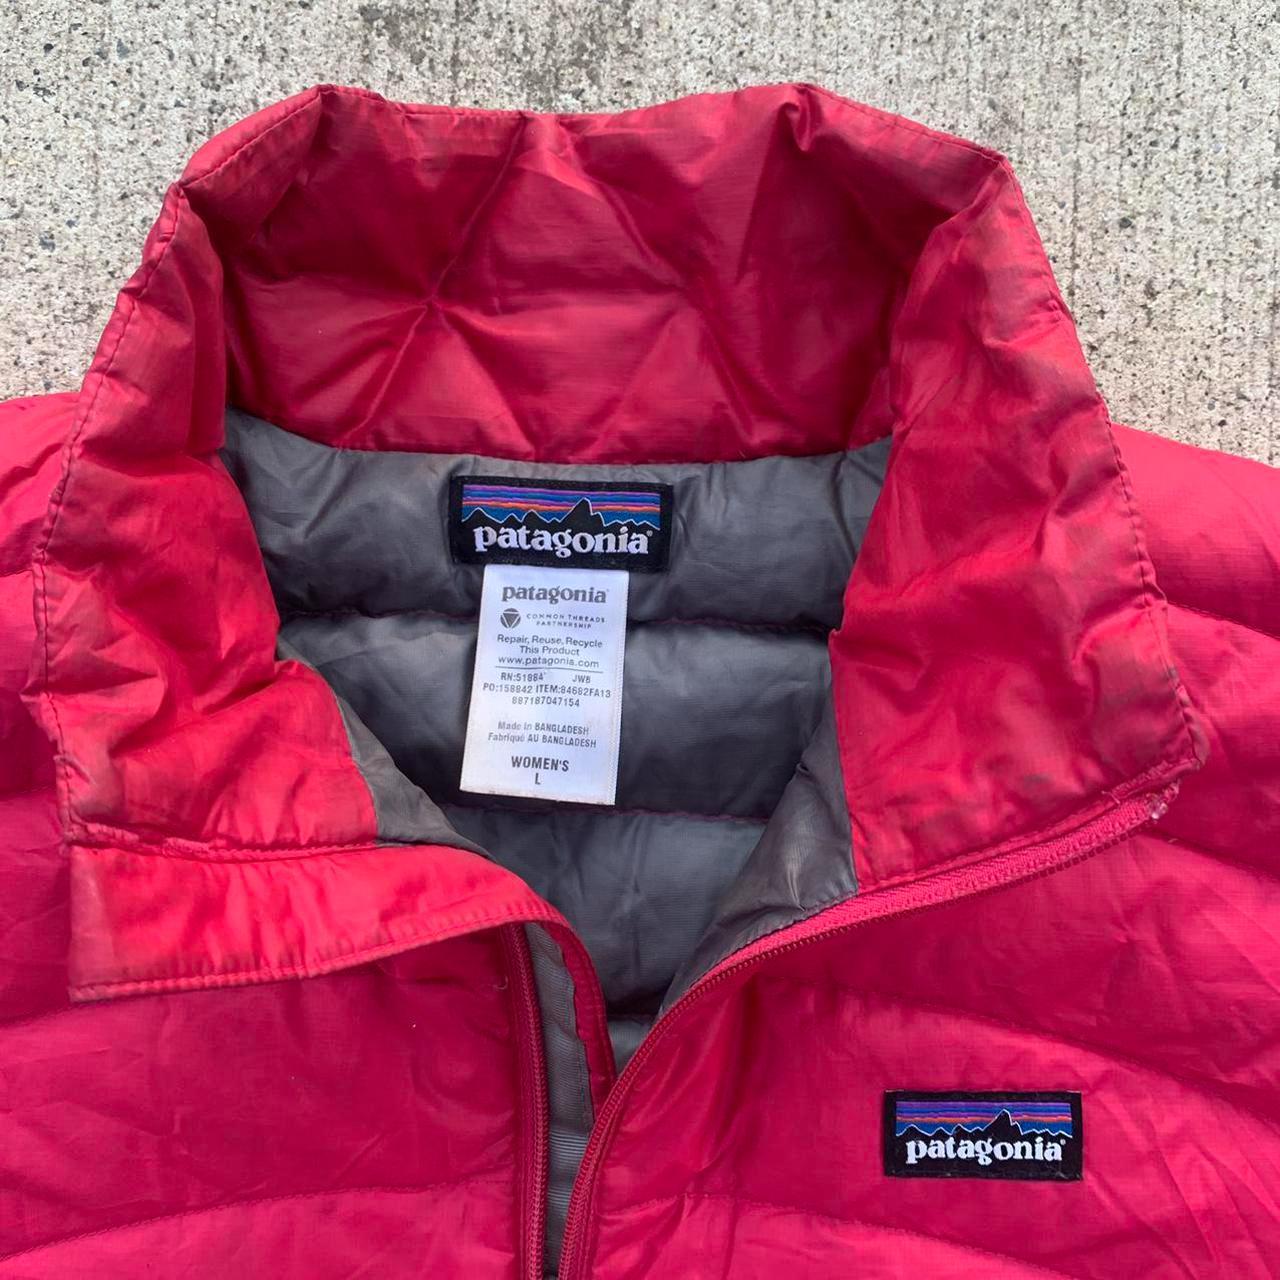 Product Image 3 - Patagonia Puffer Jacket
Condition: used, needs